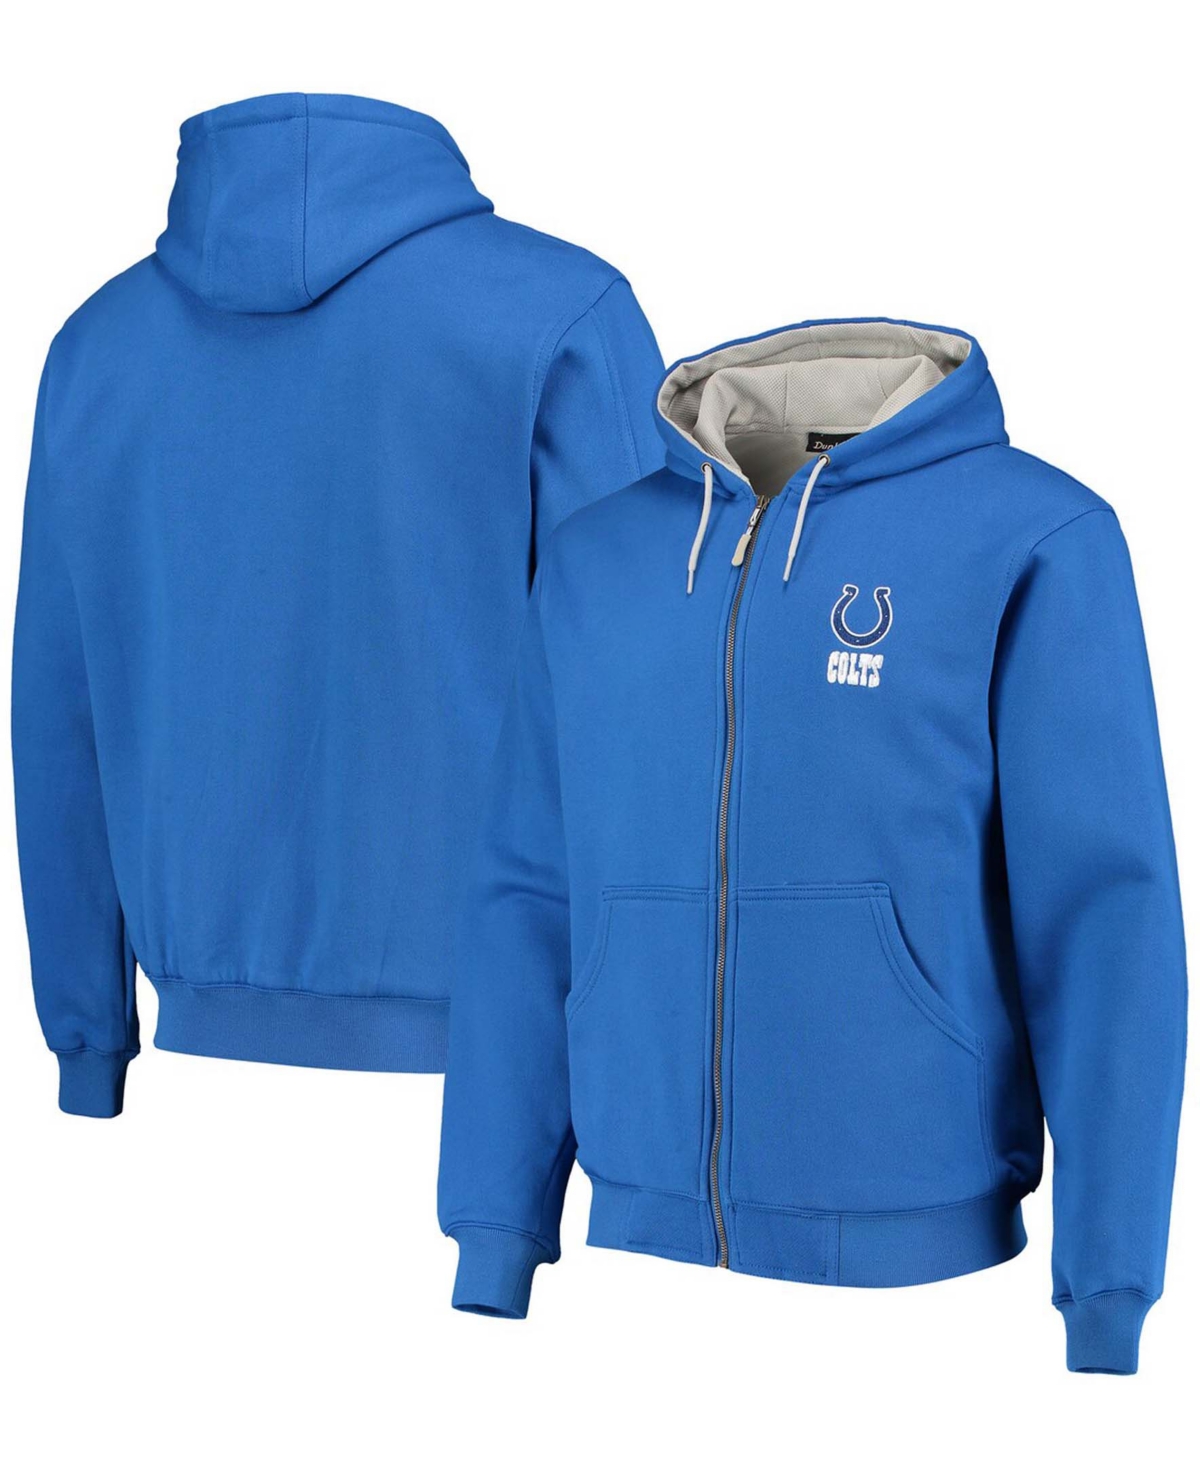 Men's Royal Indianapolis Colts Craftsman Thermal Lined Full-Zip Hoodie - Royal Blue